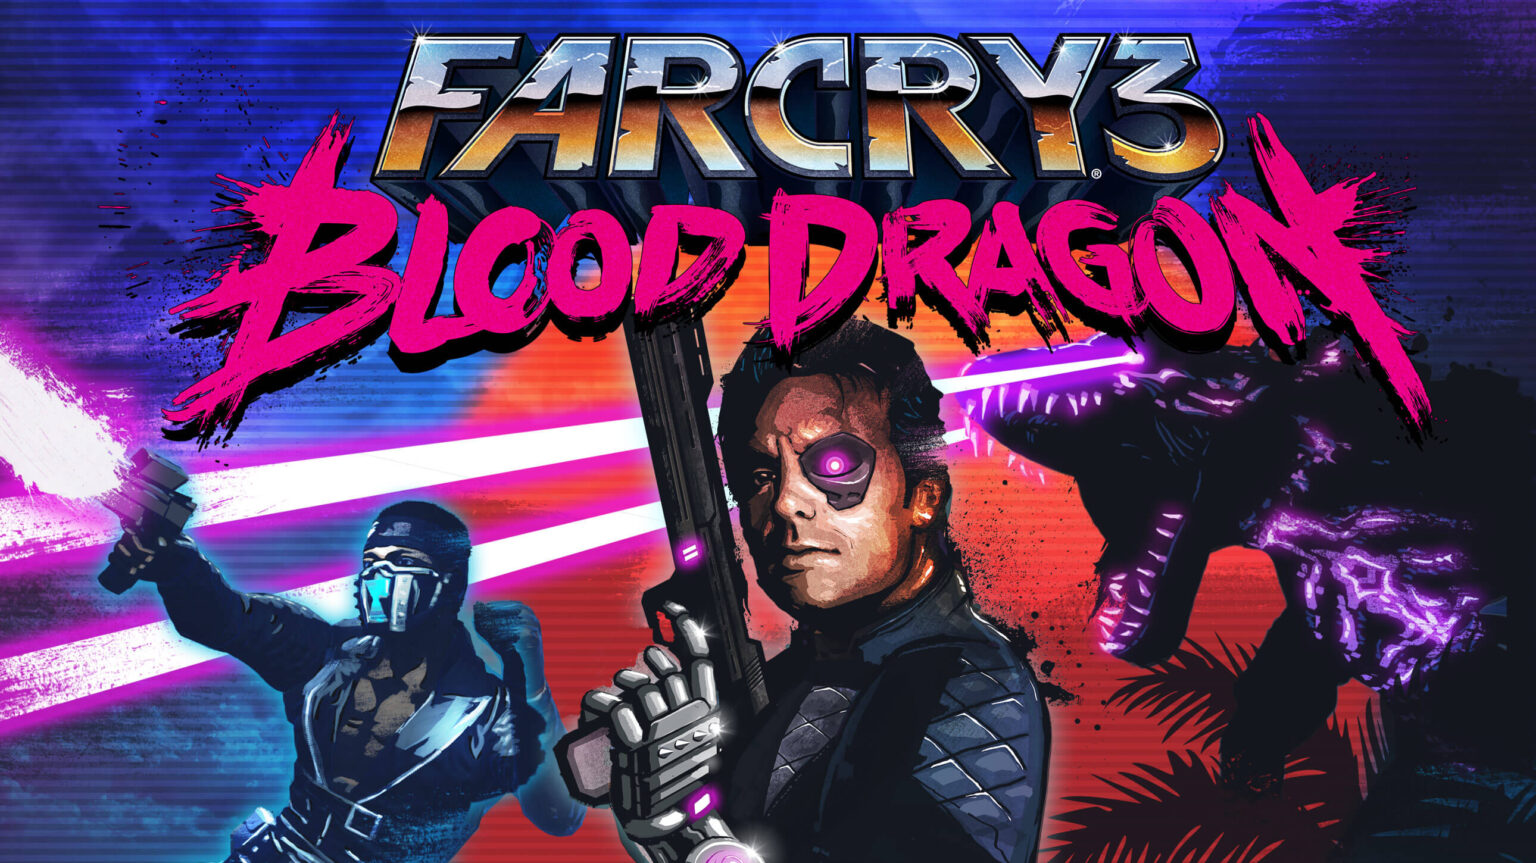 far cry 3 blood dragon classic edition download free